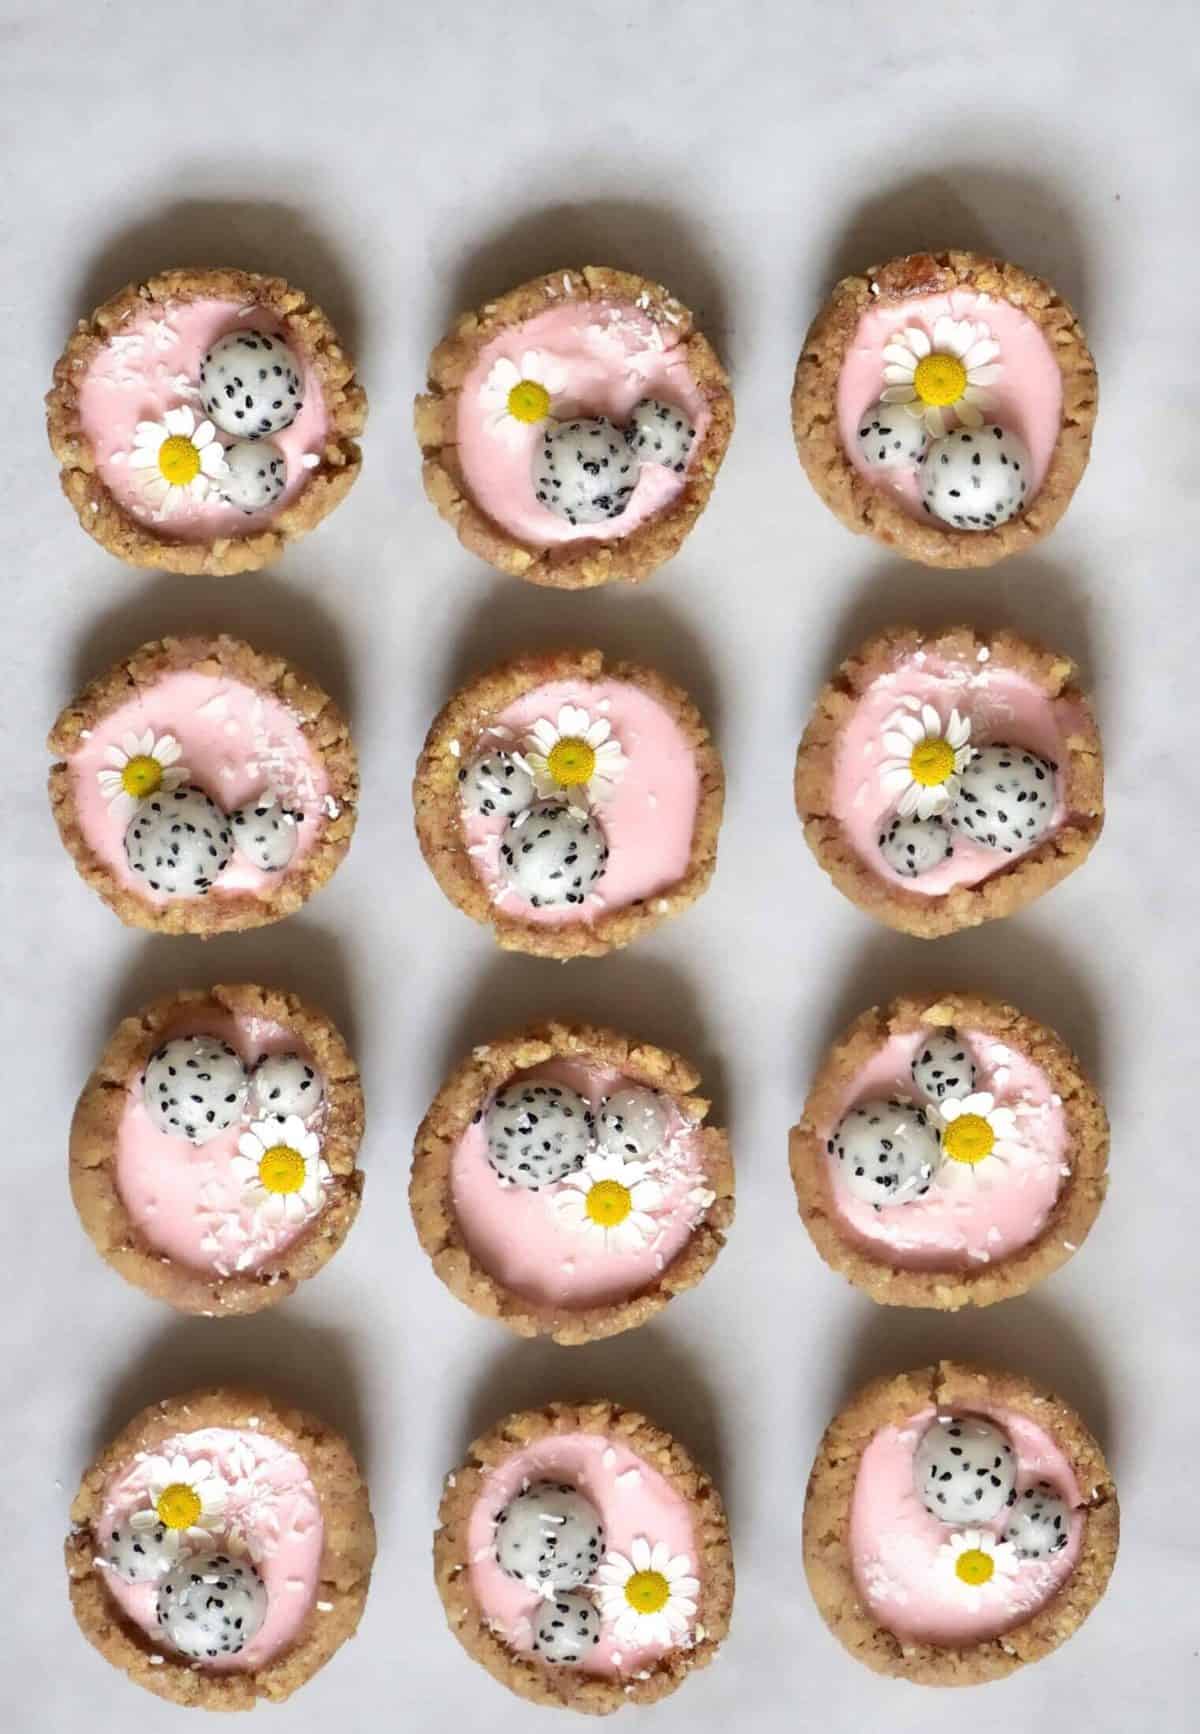 Mini pink tarts with dragonfruit balls, coconut, and daisy flowers